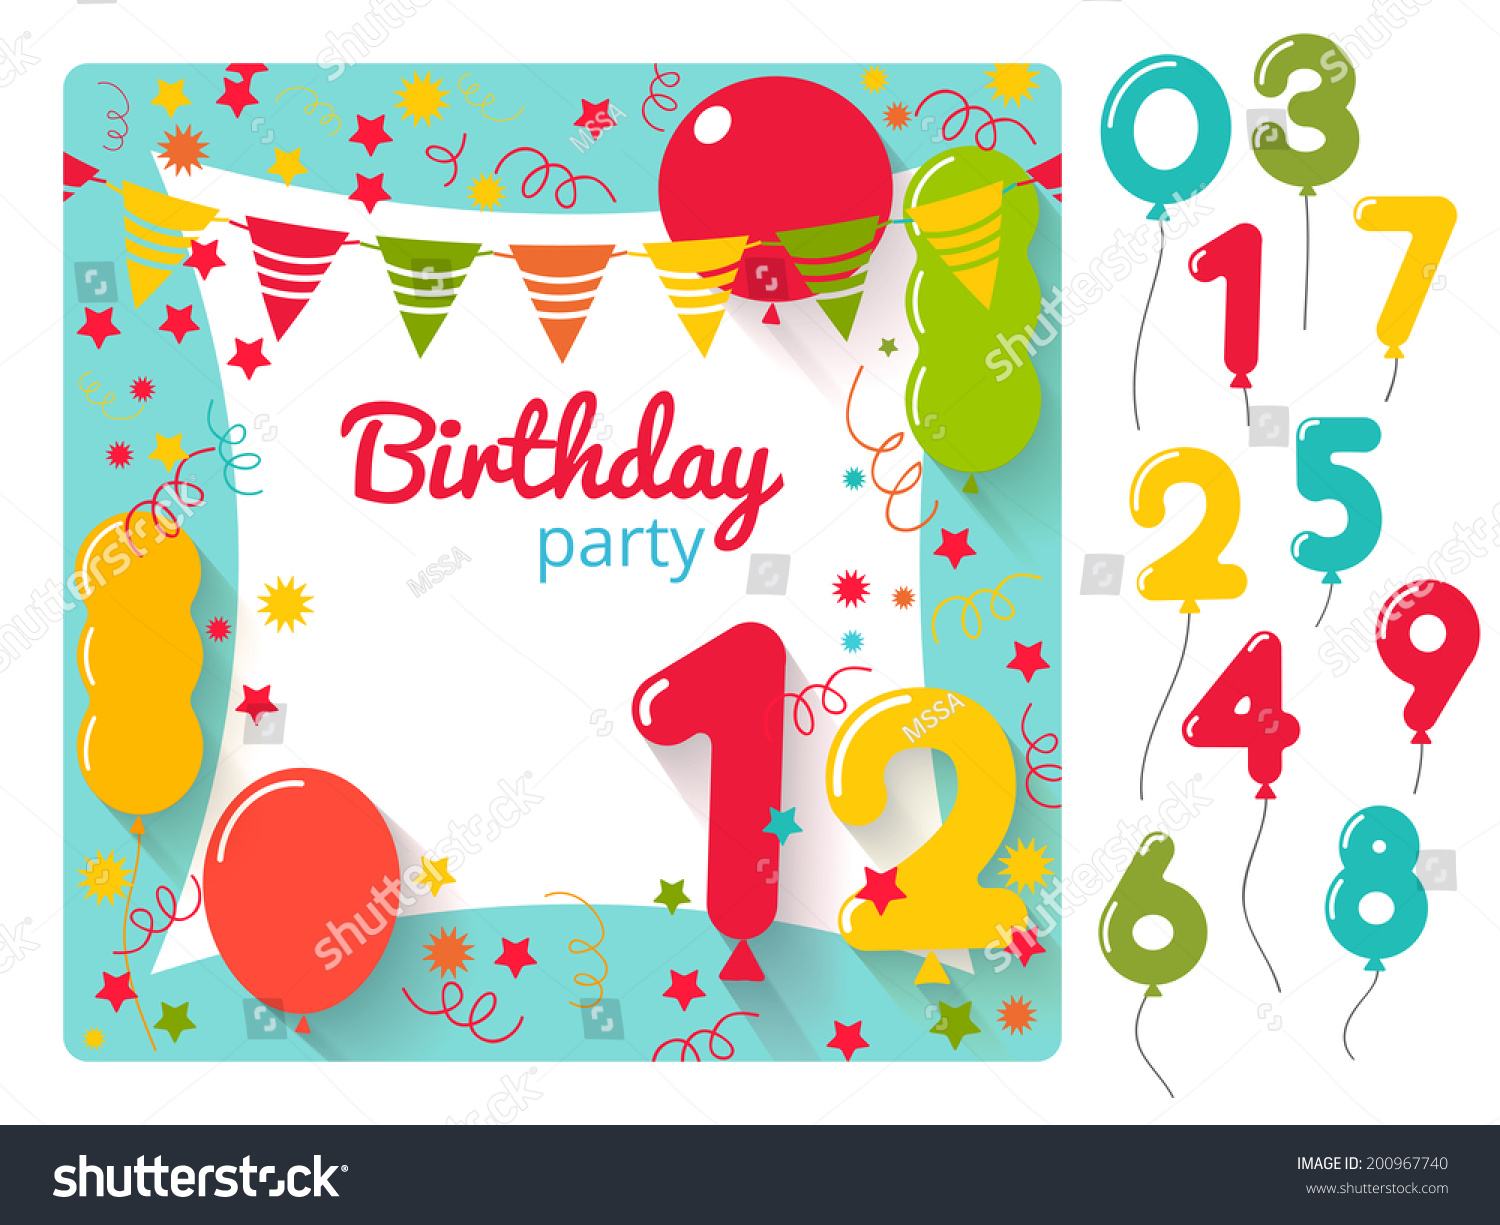 Invitation Card Design For Birthday Party. Stock ...